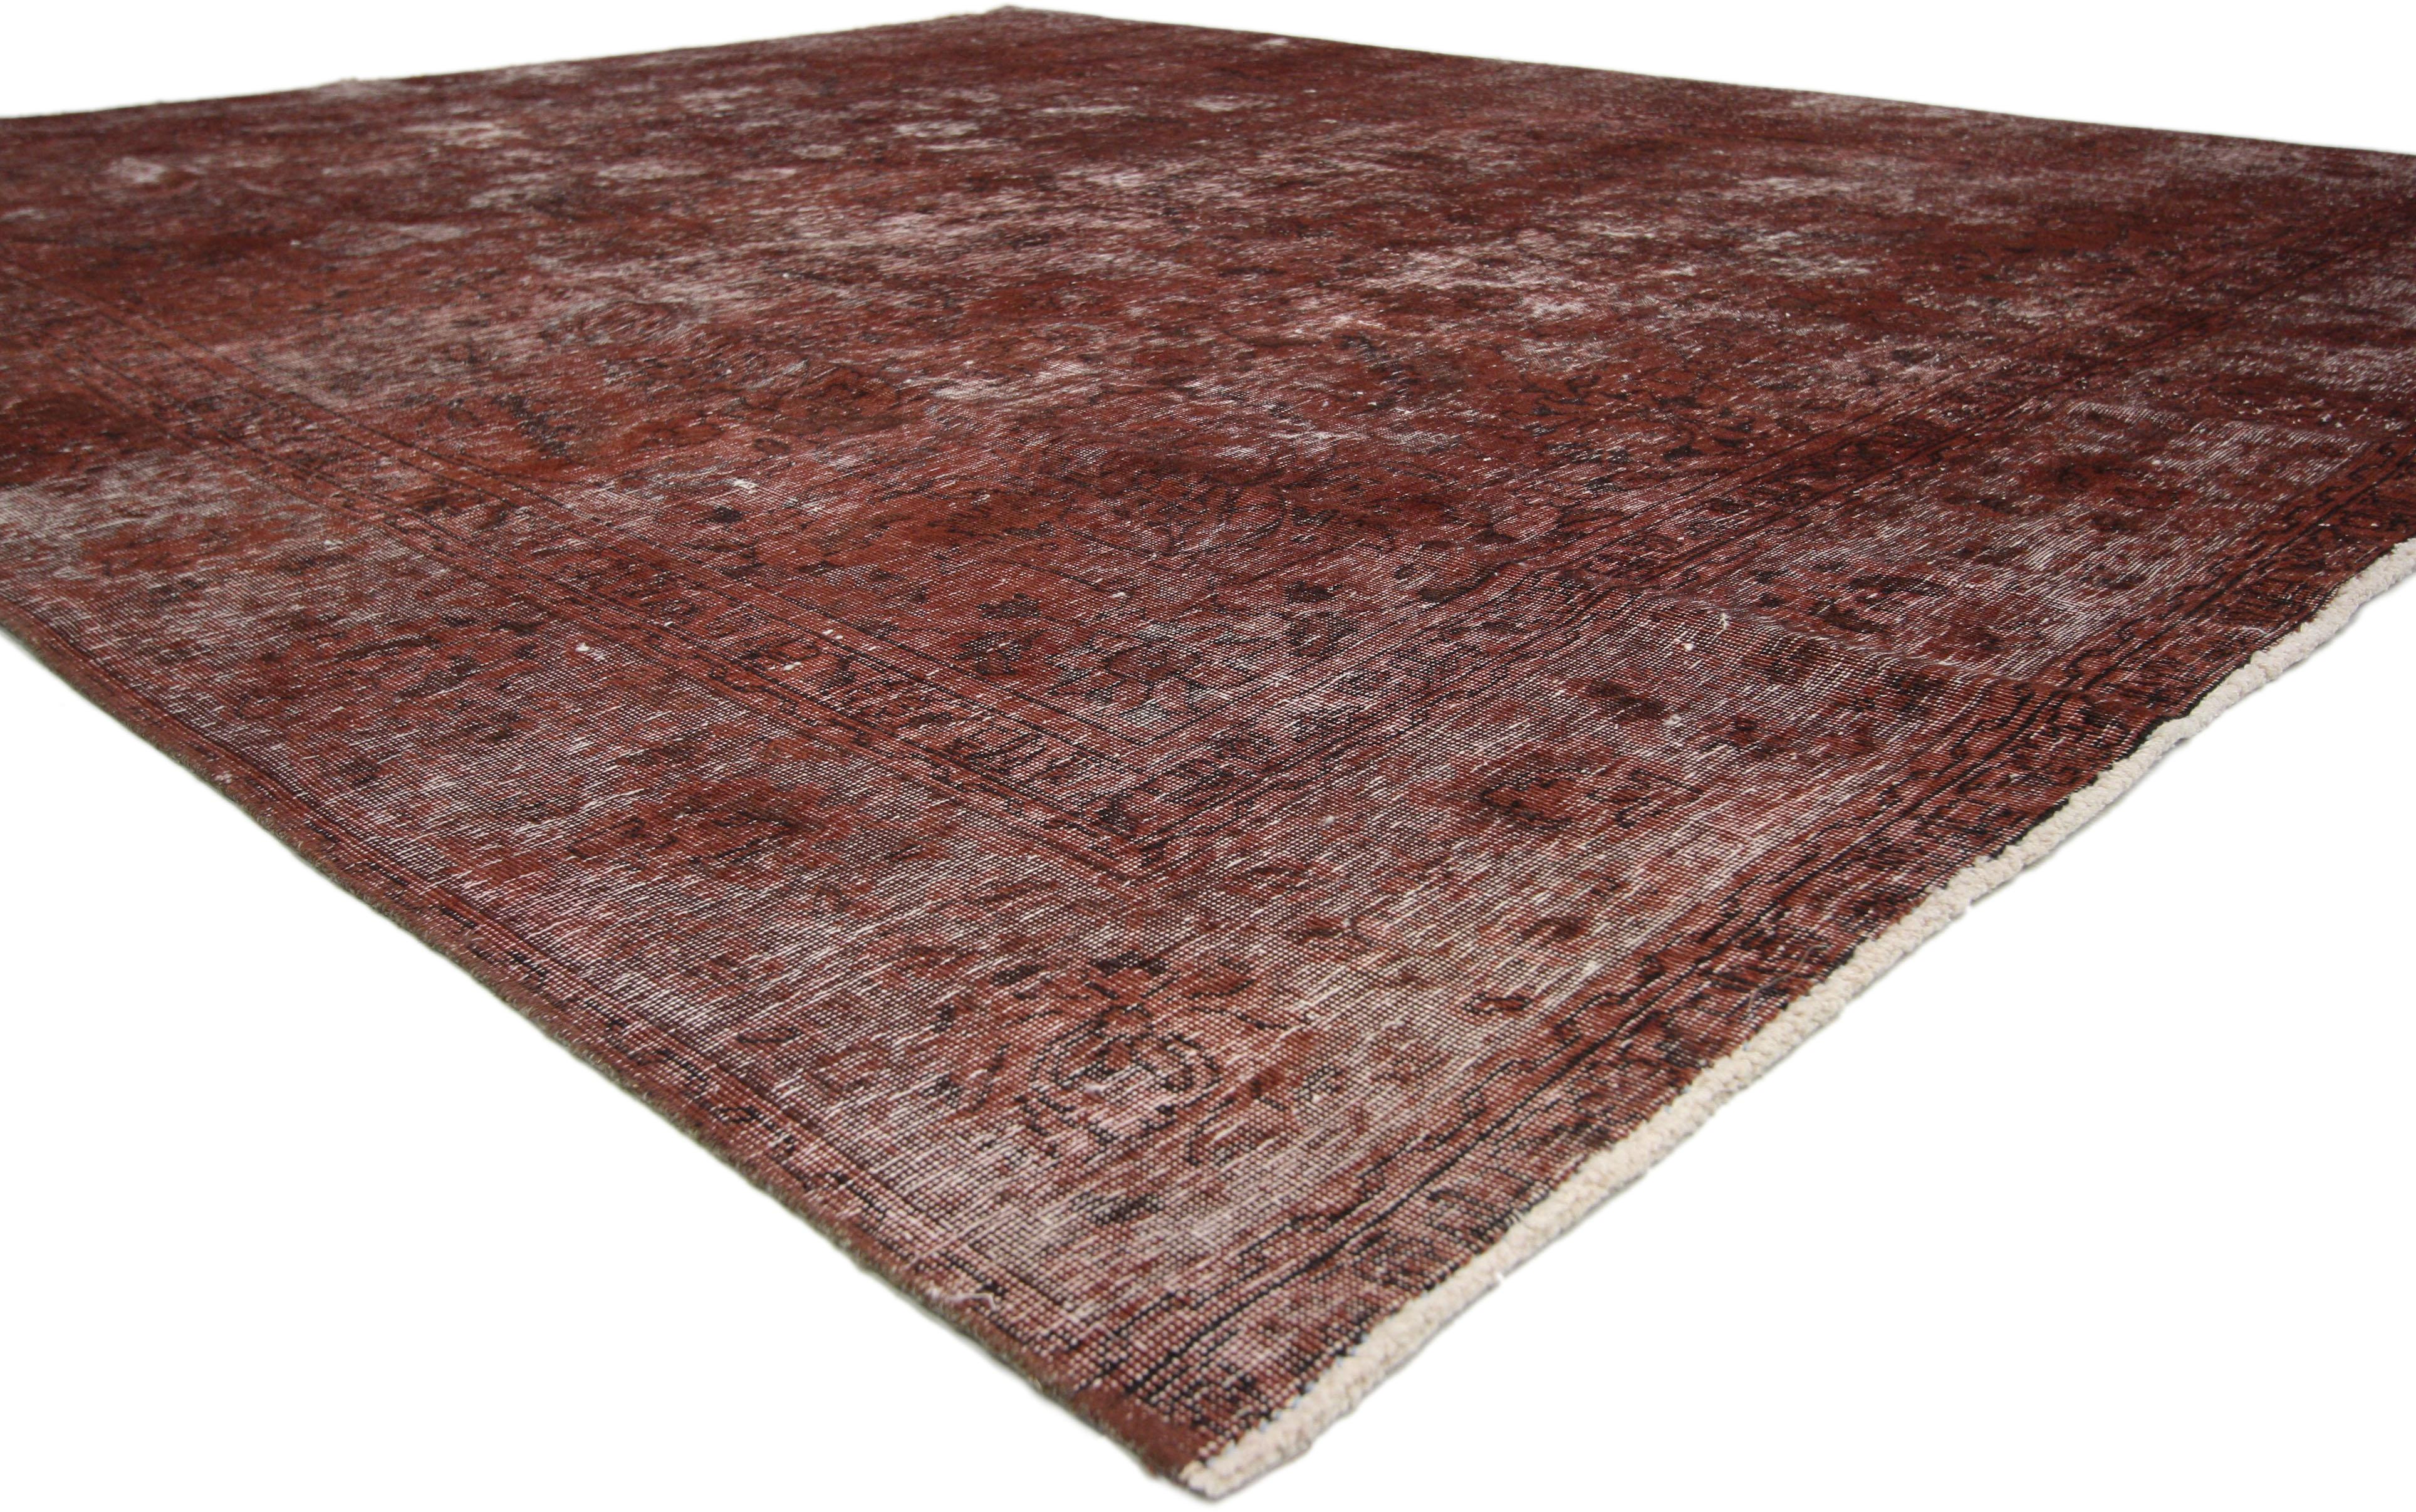 60667 Vintage Turkish Overdyed Rug, 09'00 x 10'08. 
In a captivating fusion of Rustic Spanish style and modern industrial vibes, behold the relaxed refinement of this hand-knotted wool distressed vintage Turkish overdyed area rug. Its intricate